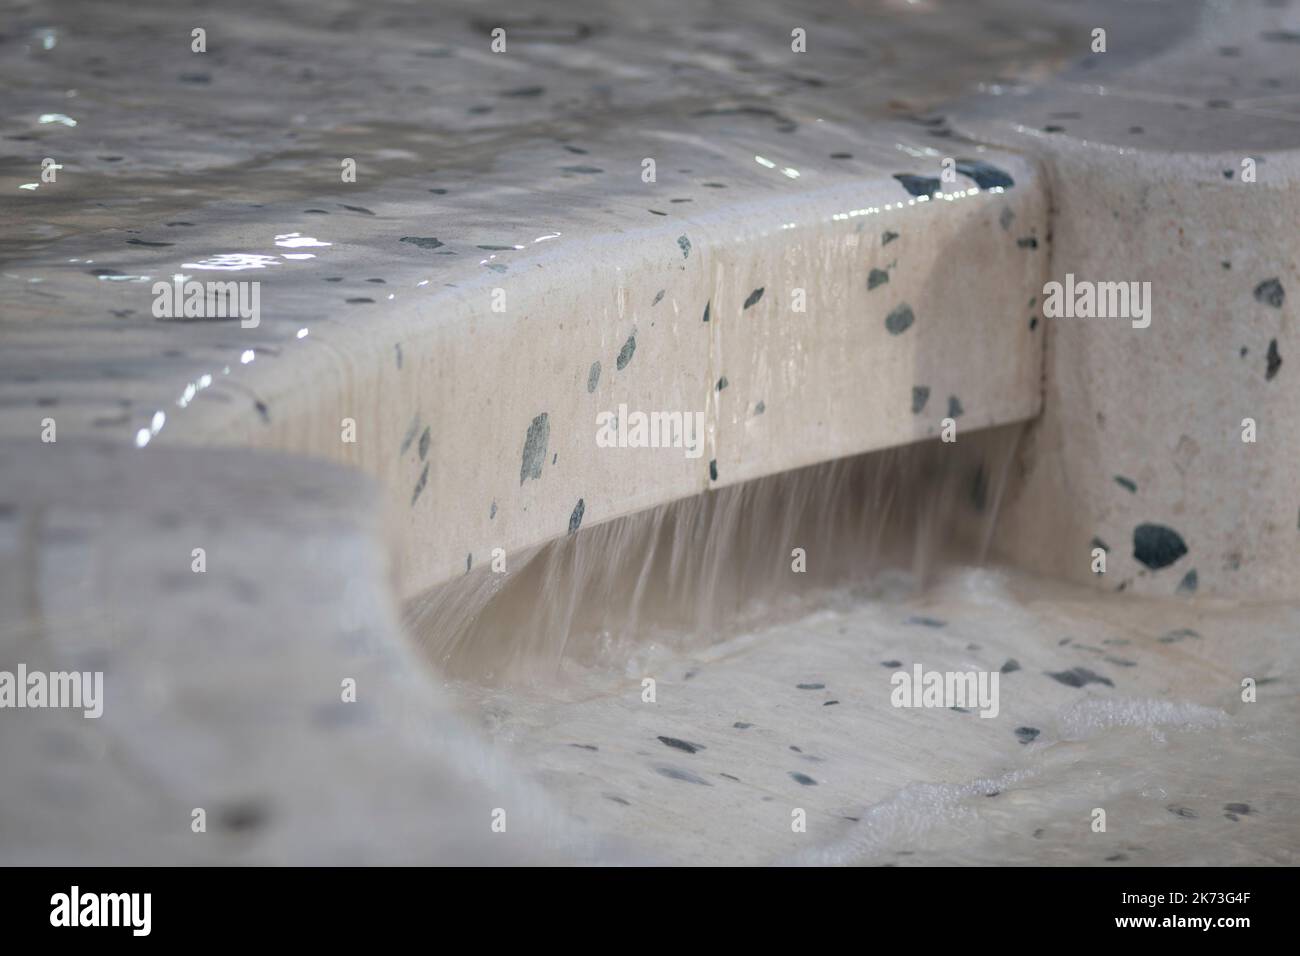 Detail of water feature. Exchange Square, London, United Kingdom. Architect: DSDHA, 2022. Stock Photo